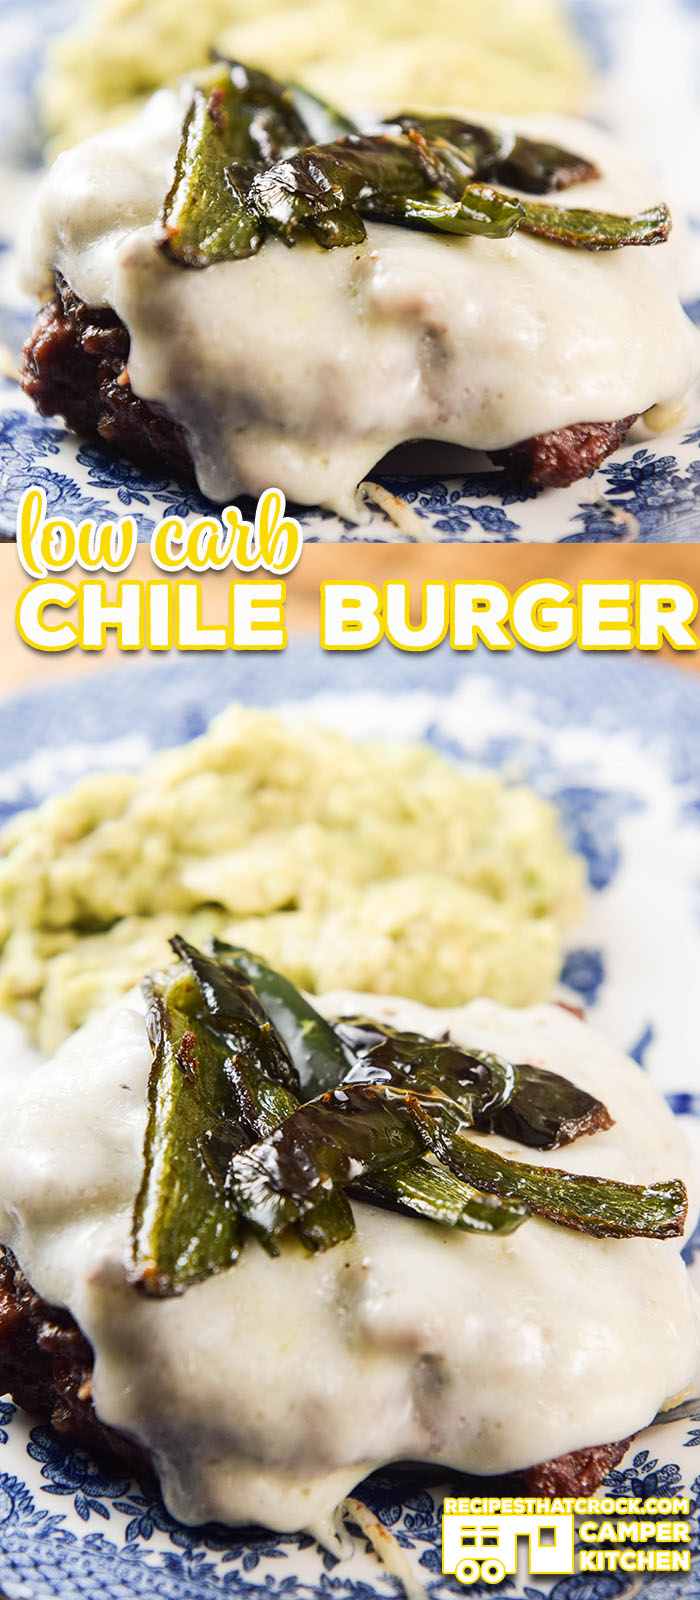 Are you looking for a low carb meal idea that your whole family will enjoy? Our Low Carb Chile Burger Recipe is a favorite in our Camper Kitchen! Serve it up with a side our guacamole for a delicious meal or with a bun for your carb loving friends! via @recipescrock